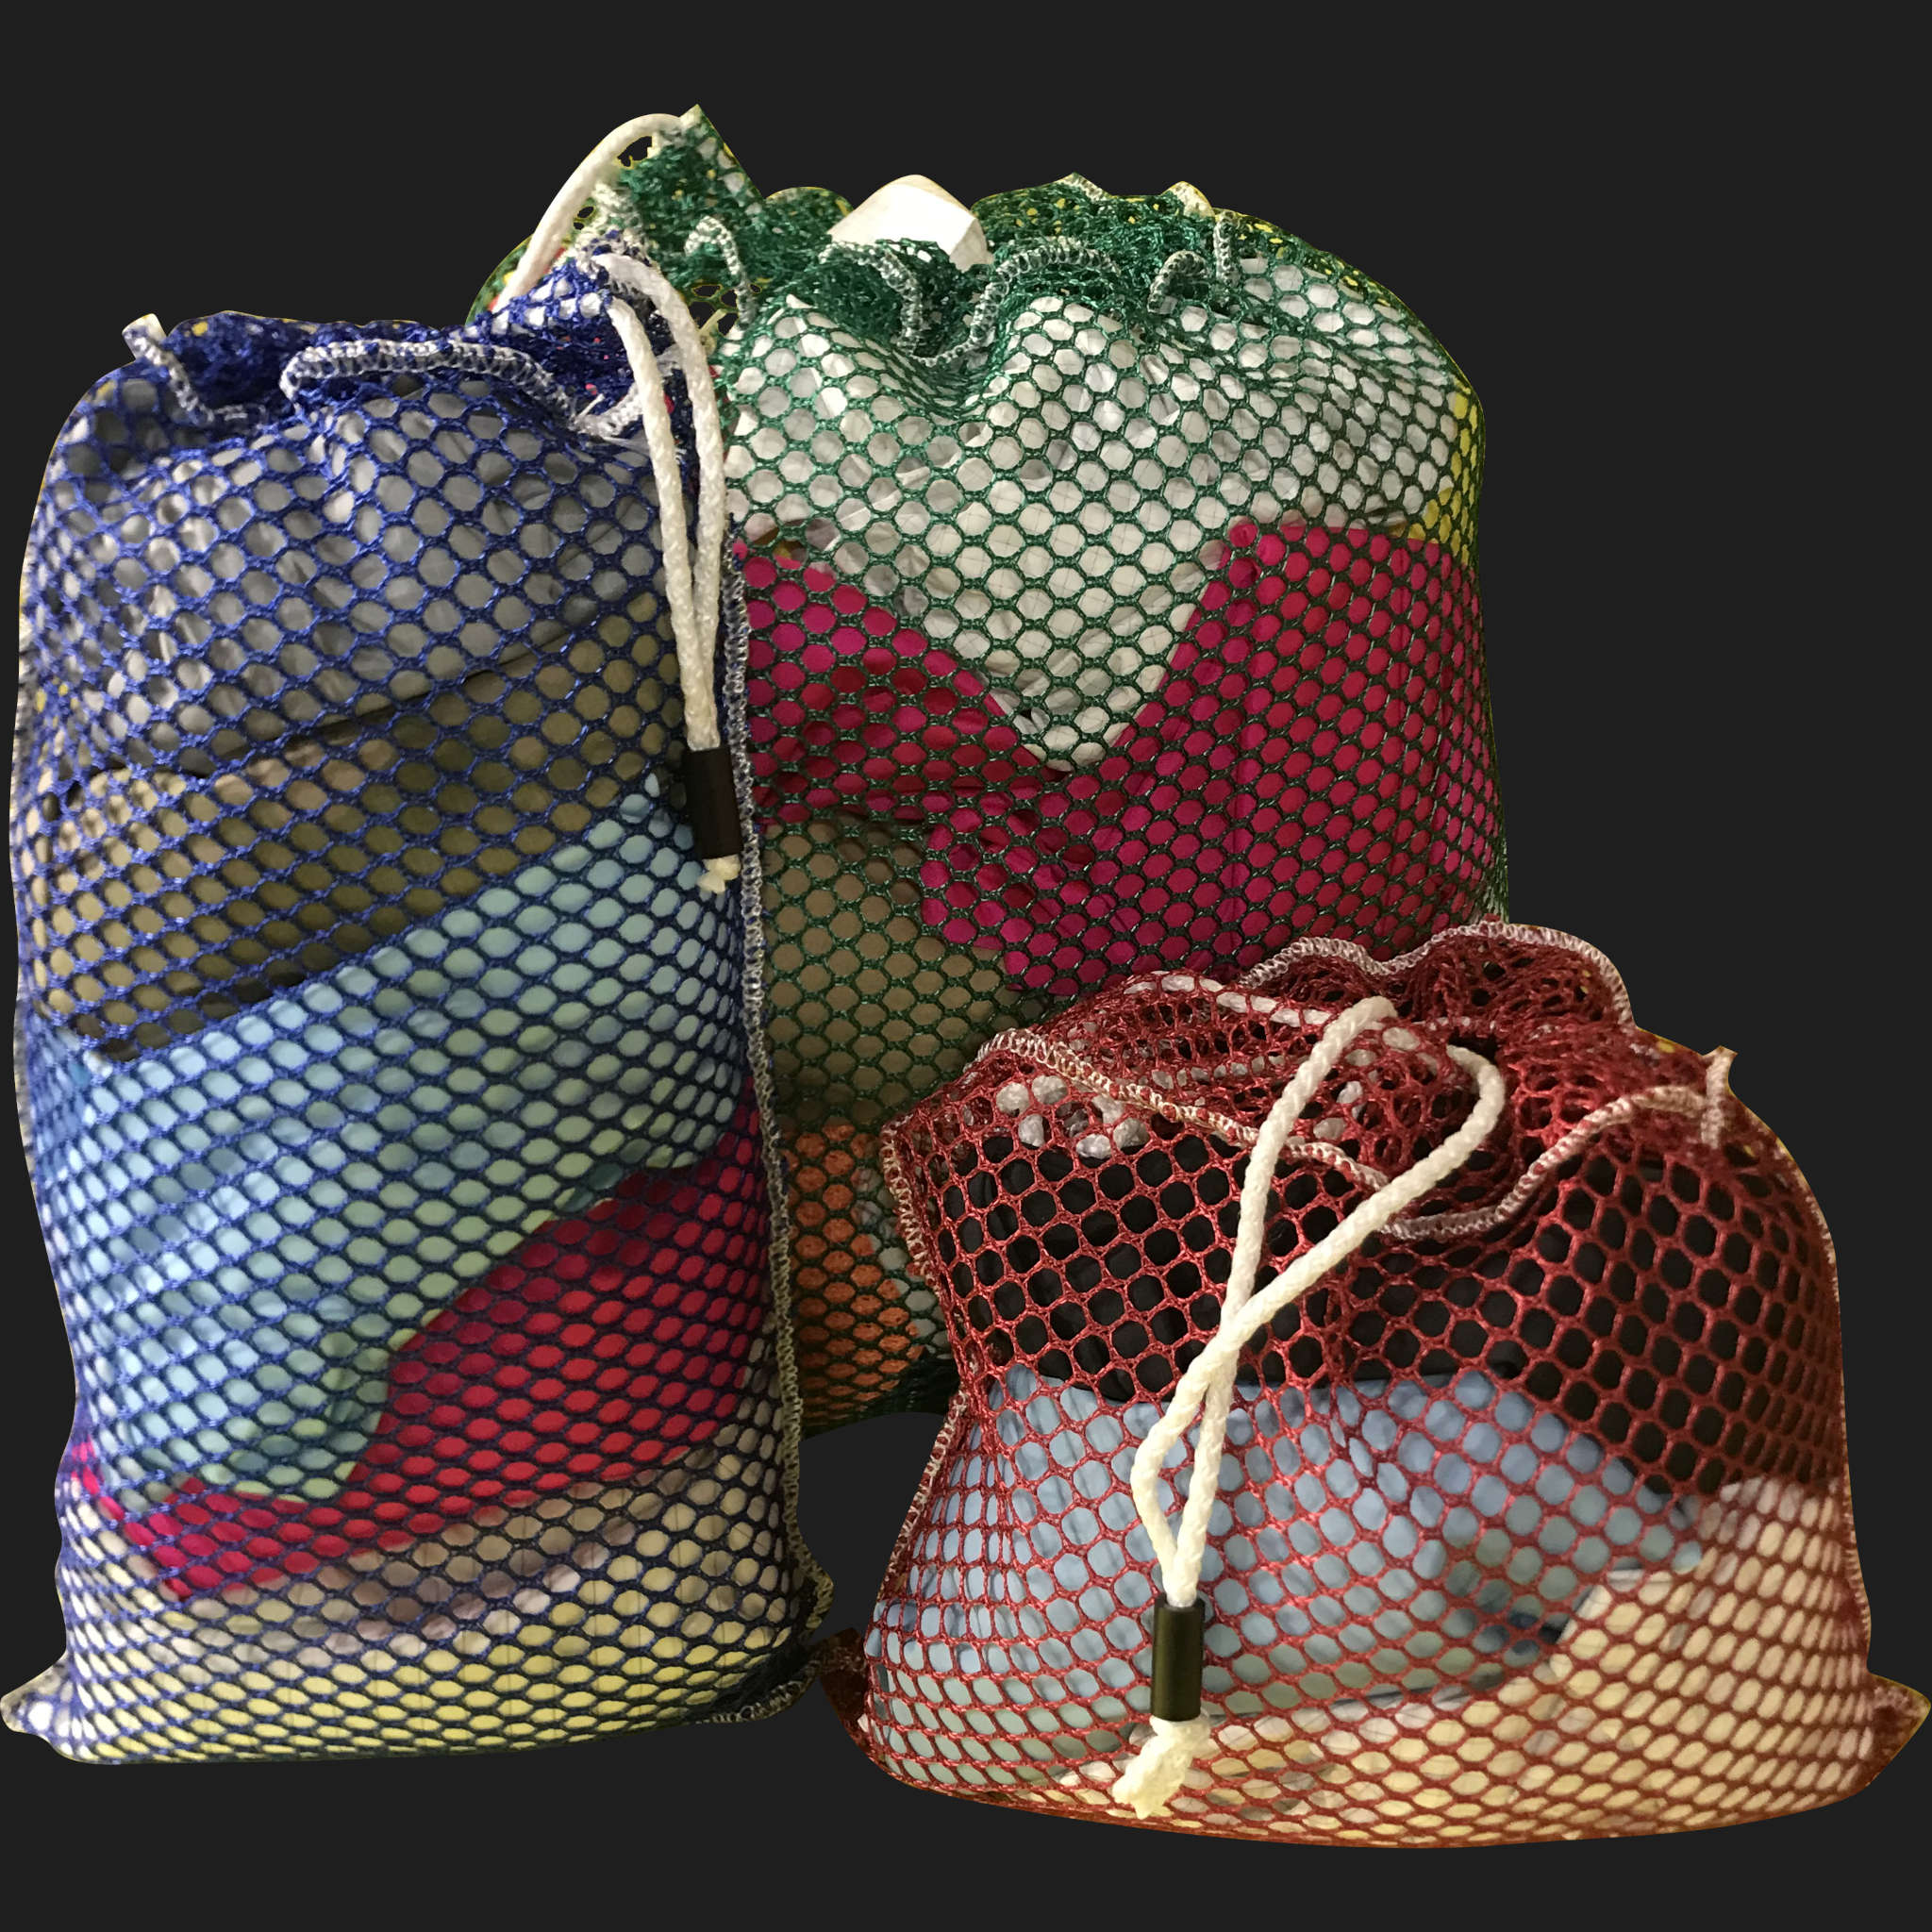 22" x 44" Customized Mesh-Net-Laundry Bags Heavy Duty with Cord and barrellock closure